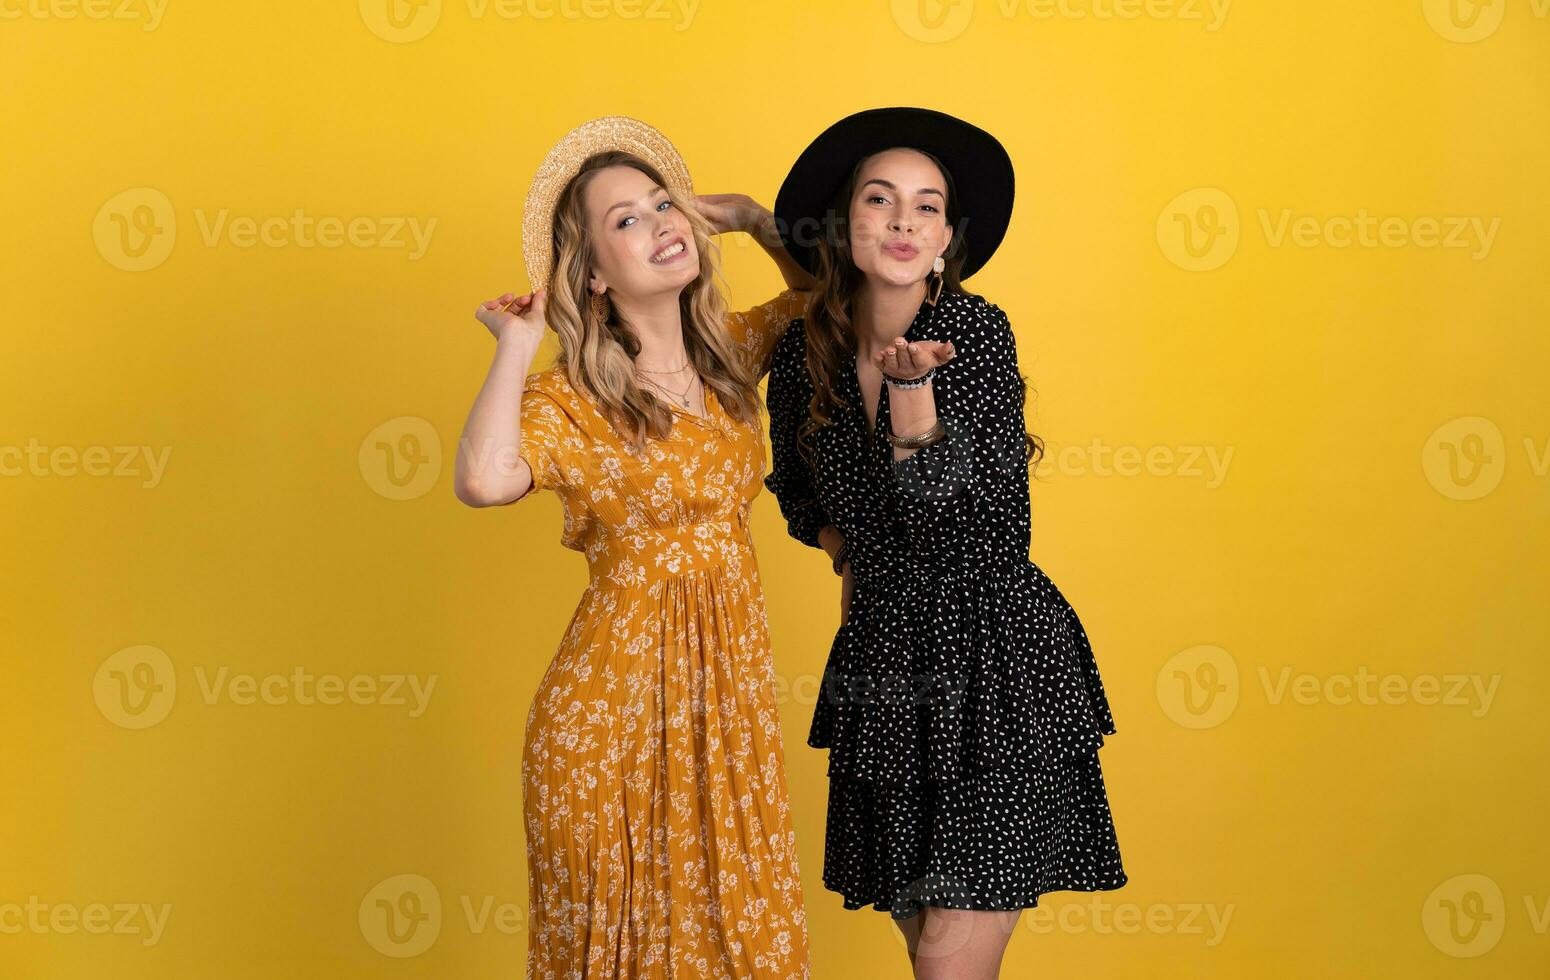 beautiful women friends together isolated on yellow background in black and yellow dress and hat photo